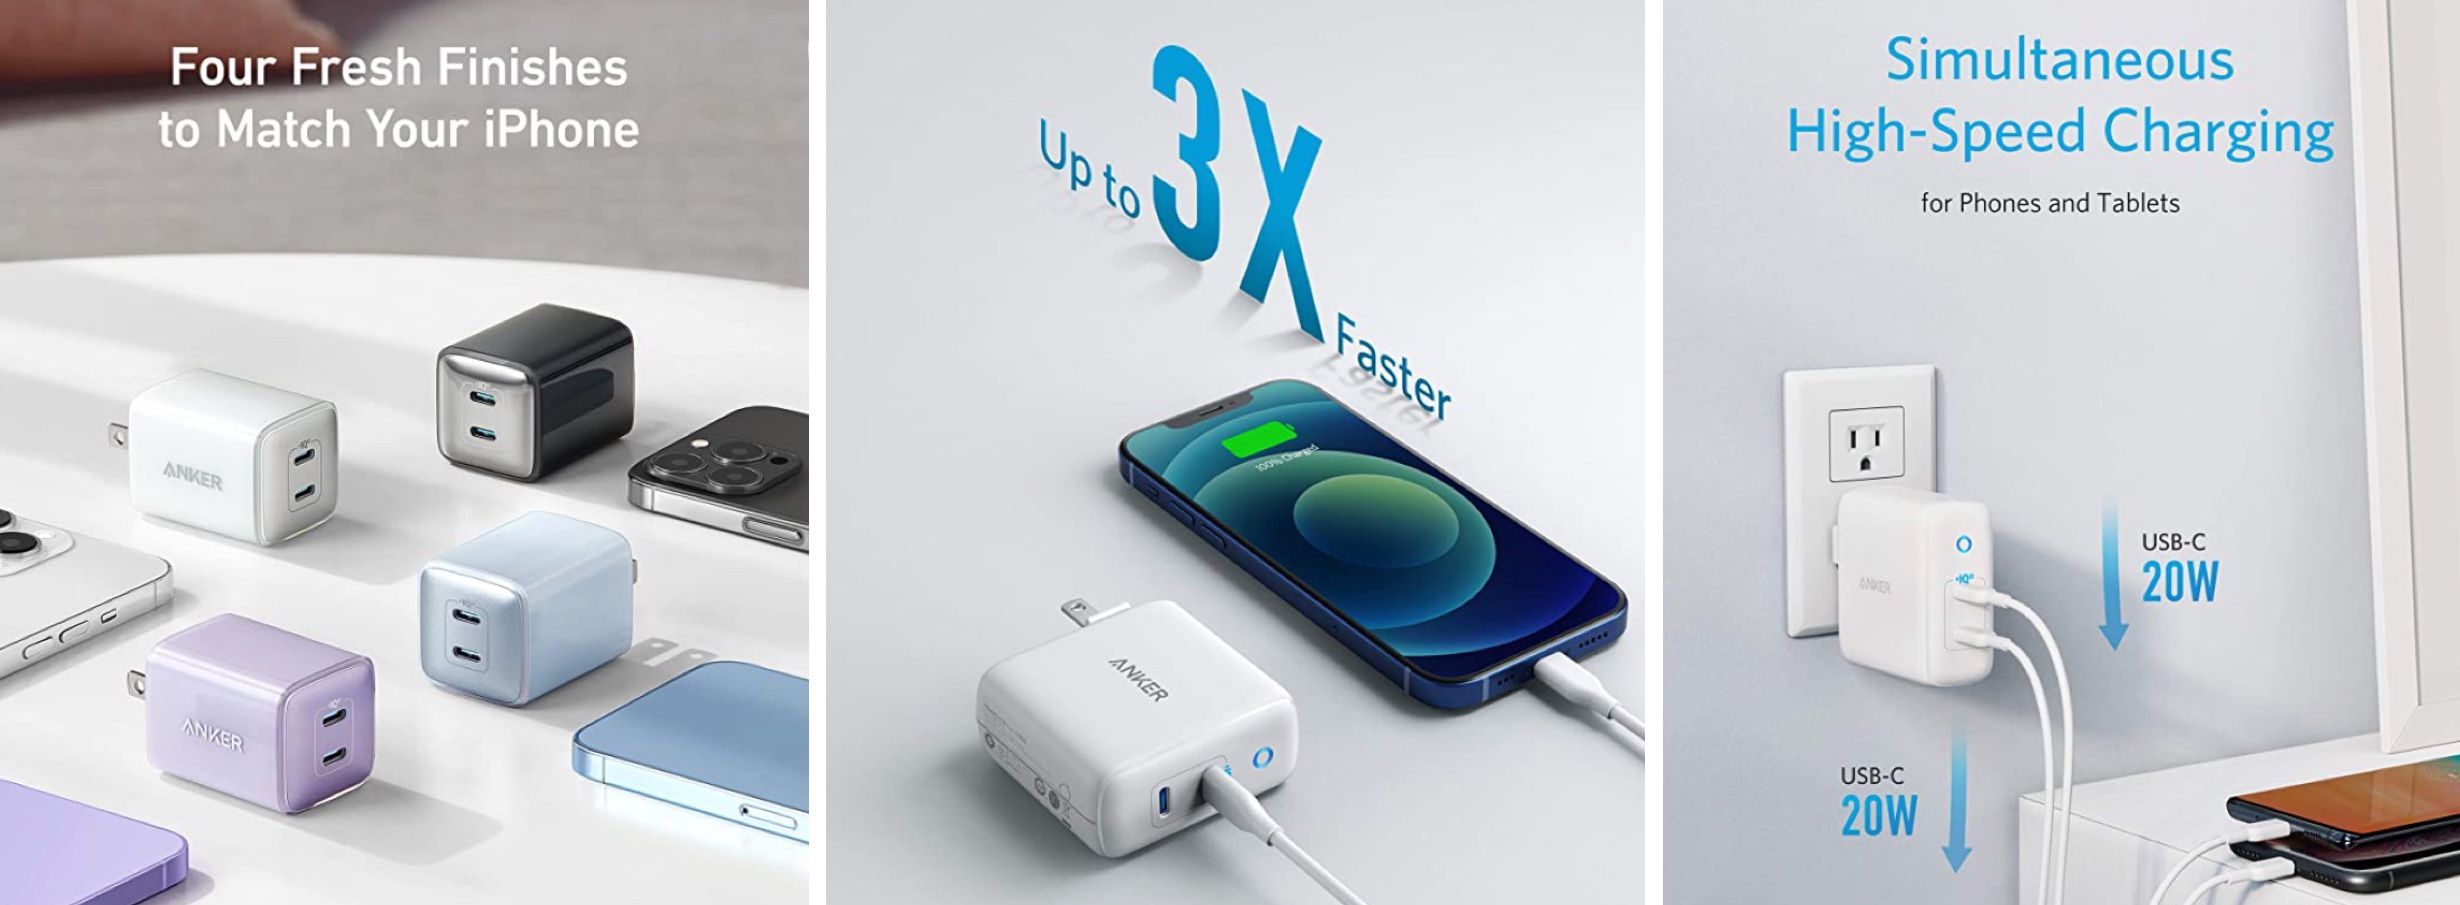 Deals: Anker Offers Cheaper Dual USB-C Charger Alternatives on Amazon, Available From $27.99 - macrumors.com